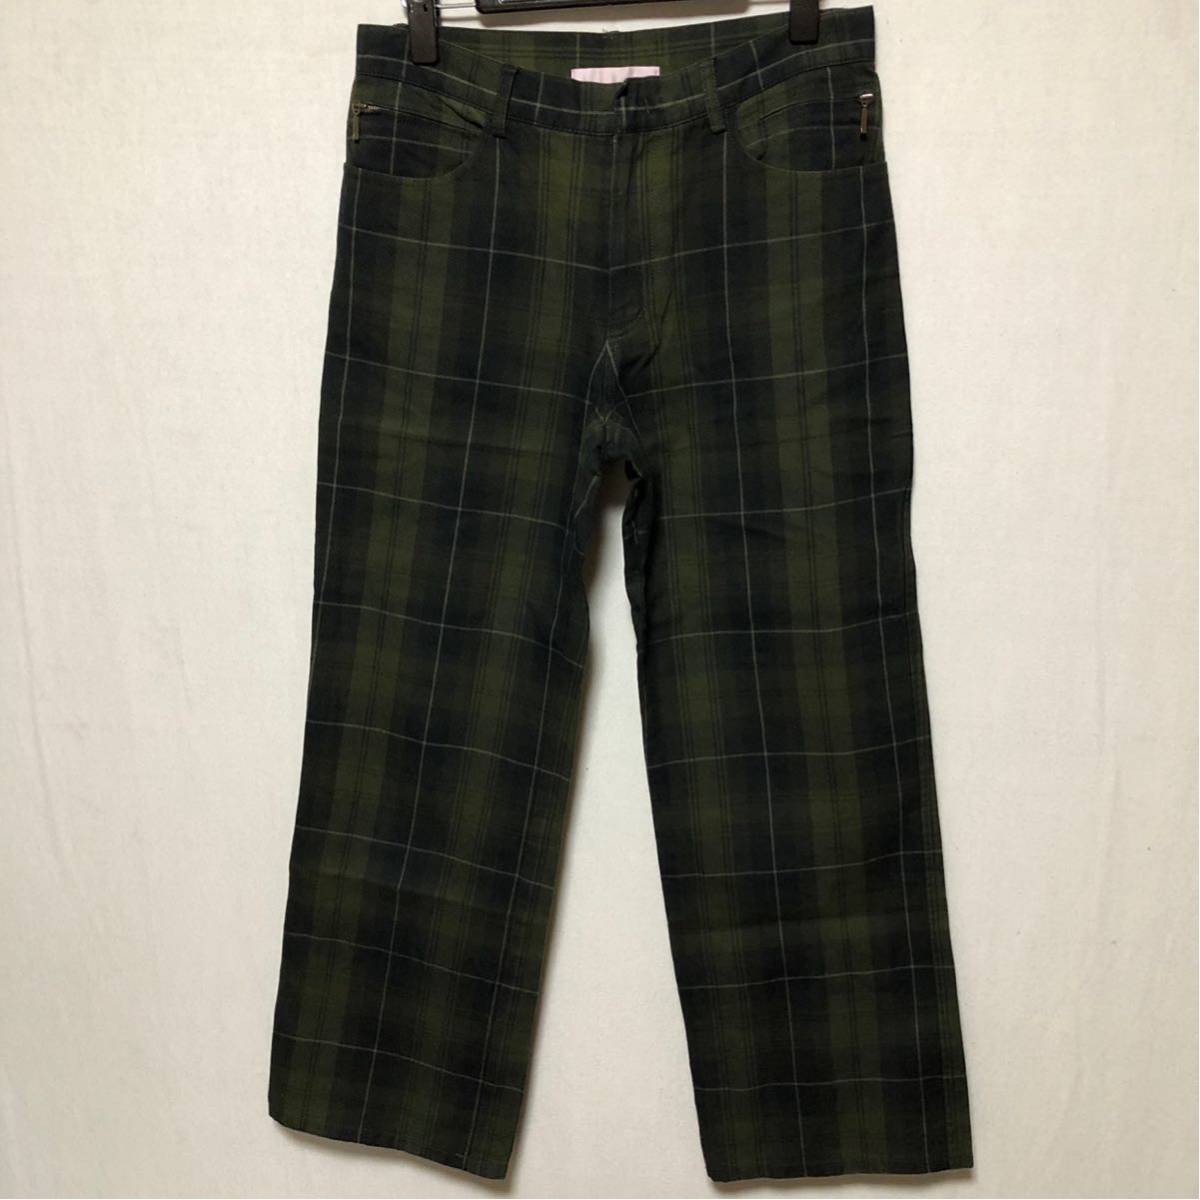 Unsqueaky Unsqueaky green series check pants S control A149